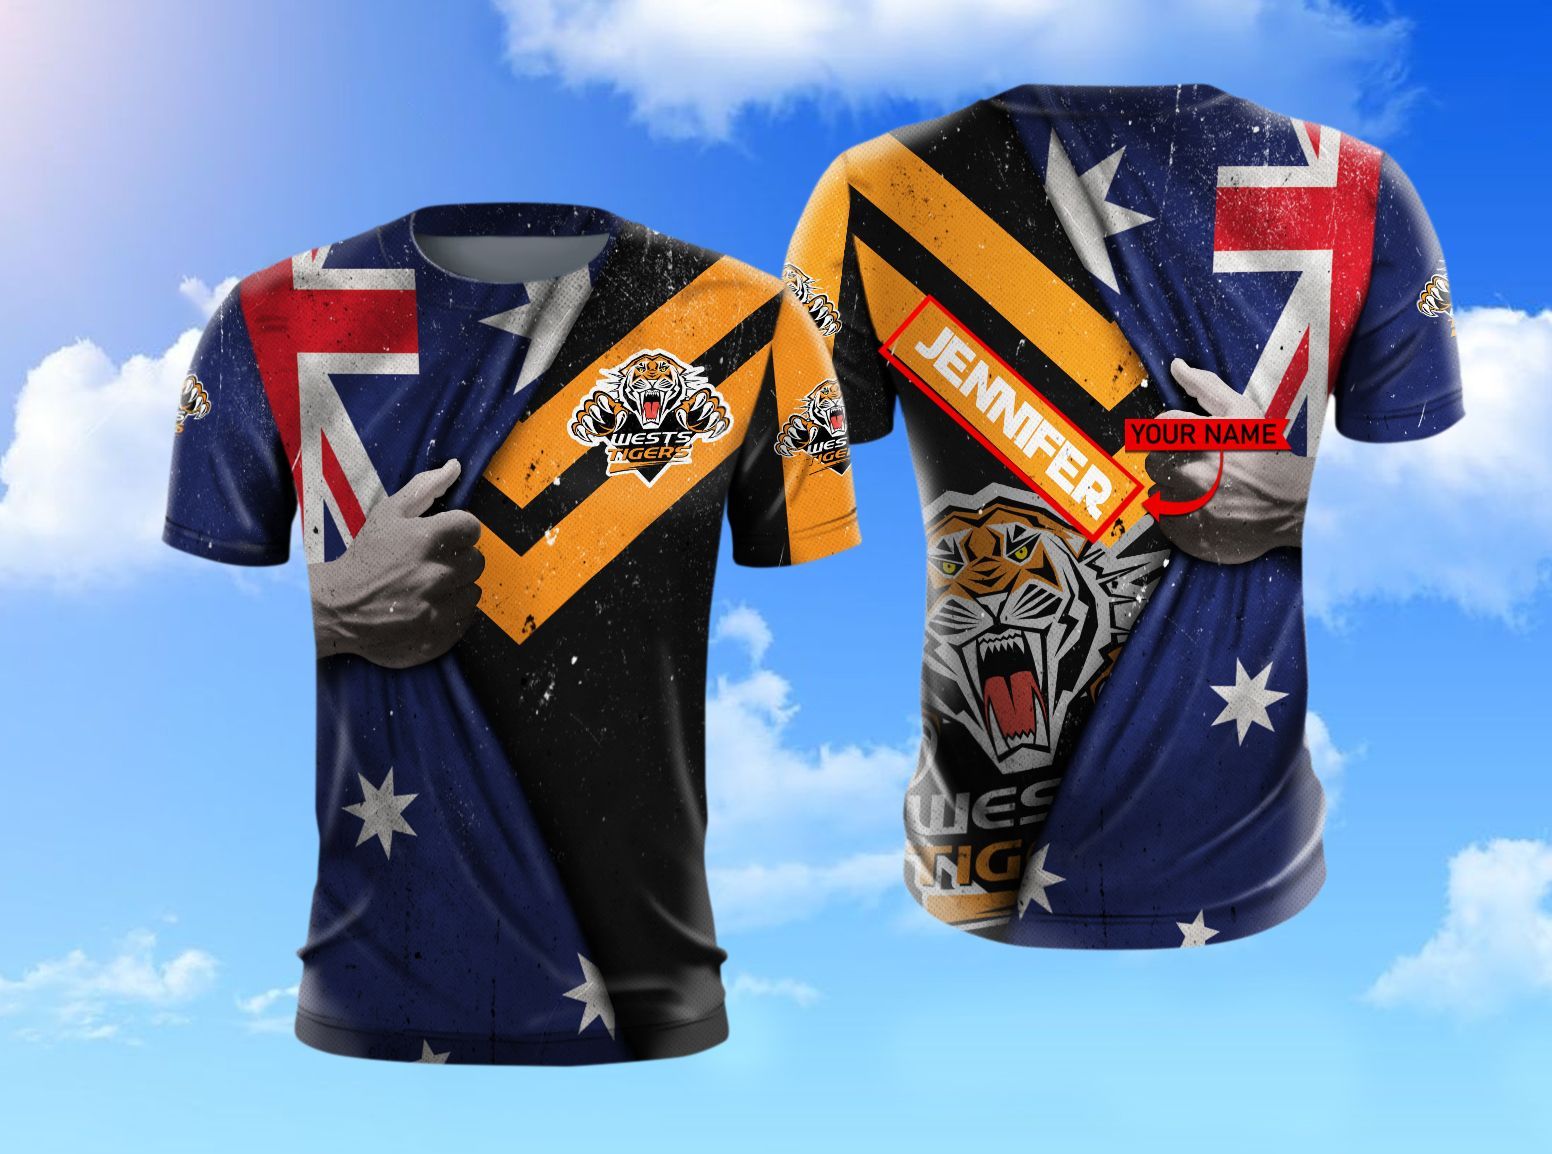 Personalised Wests Tigers Jerseys - Wests Tigers